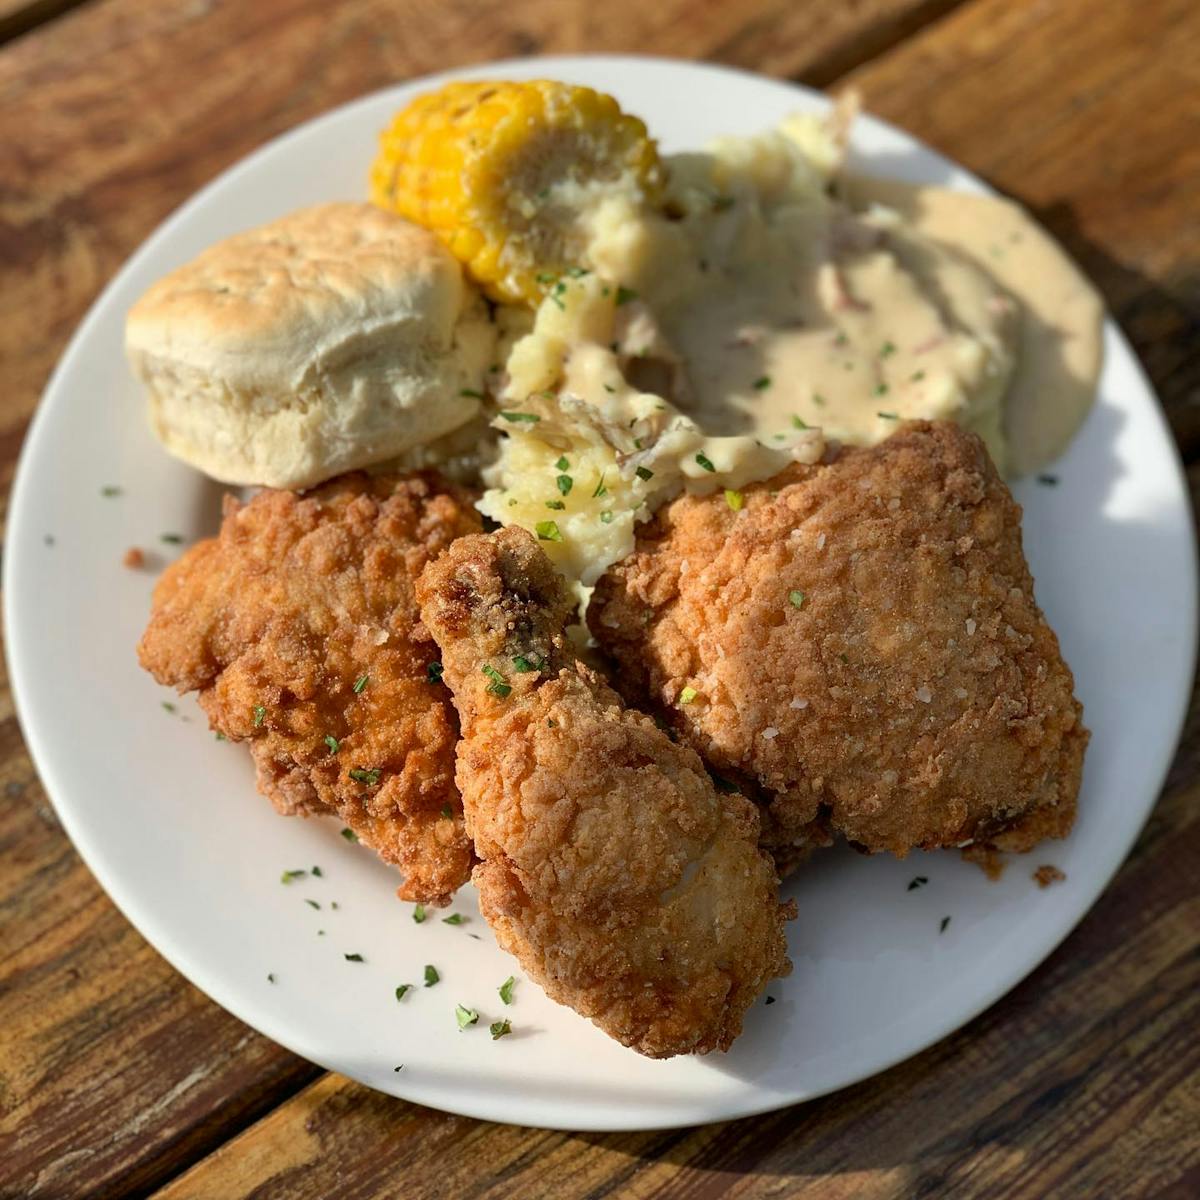 Fried chicken dinner with mashed potatoes, biscuit and corn on the cob